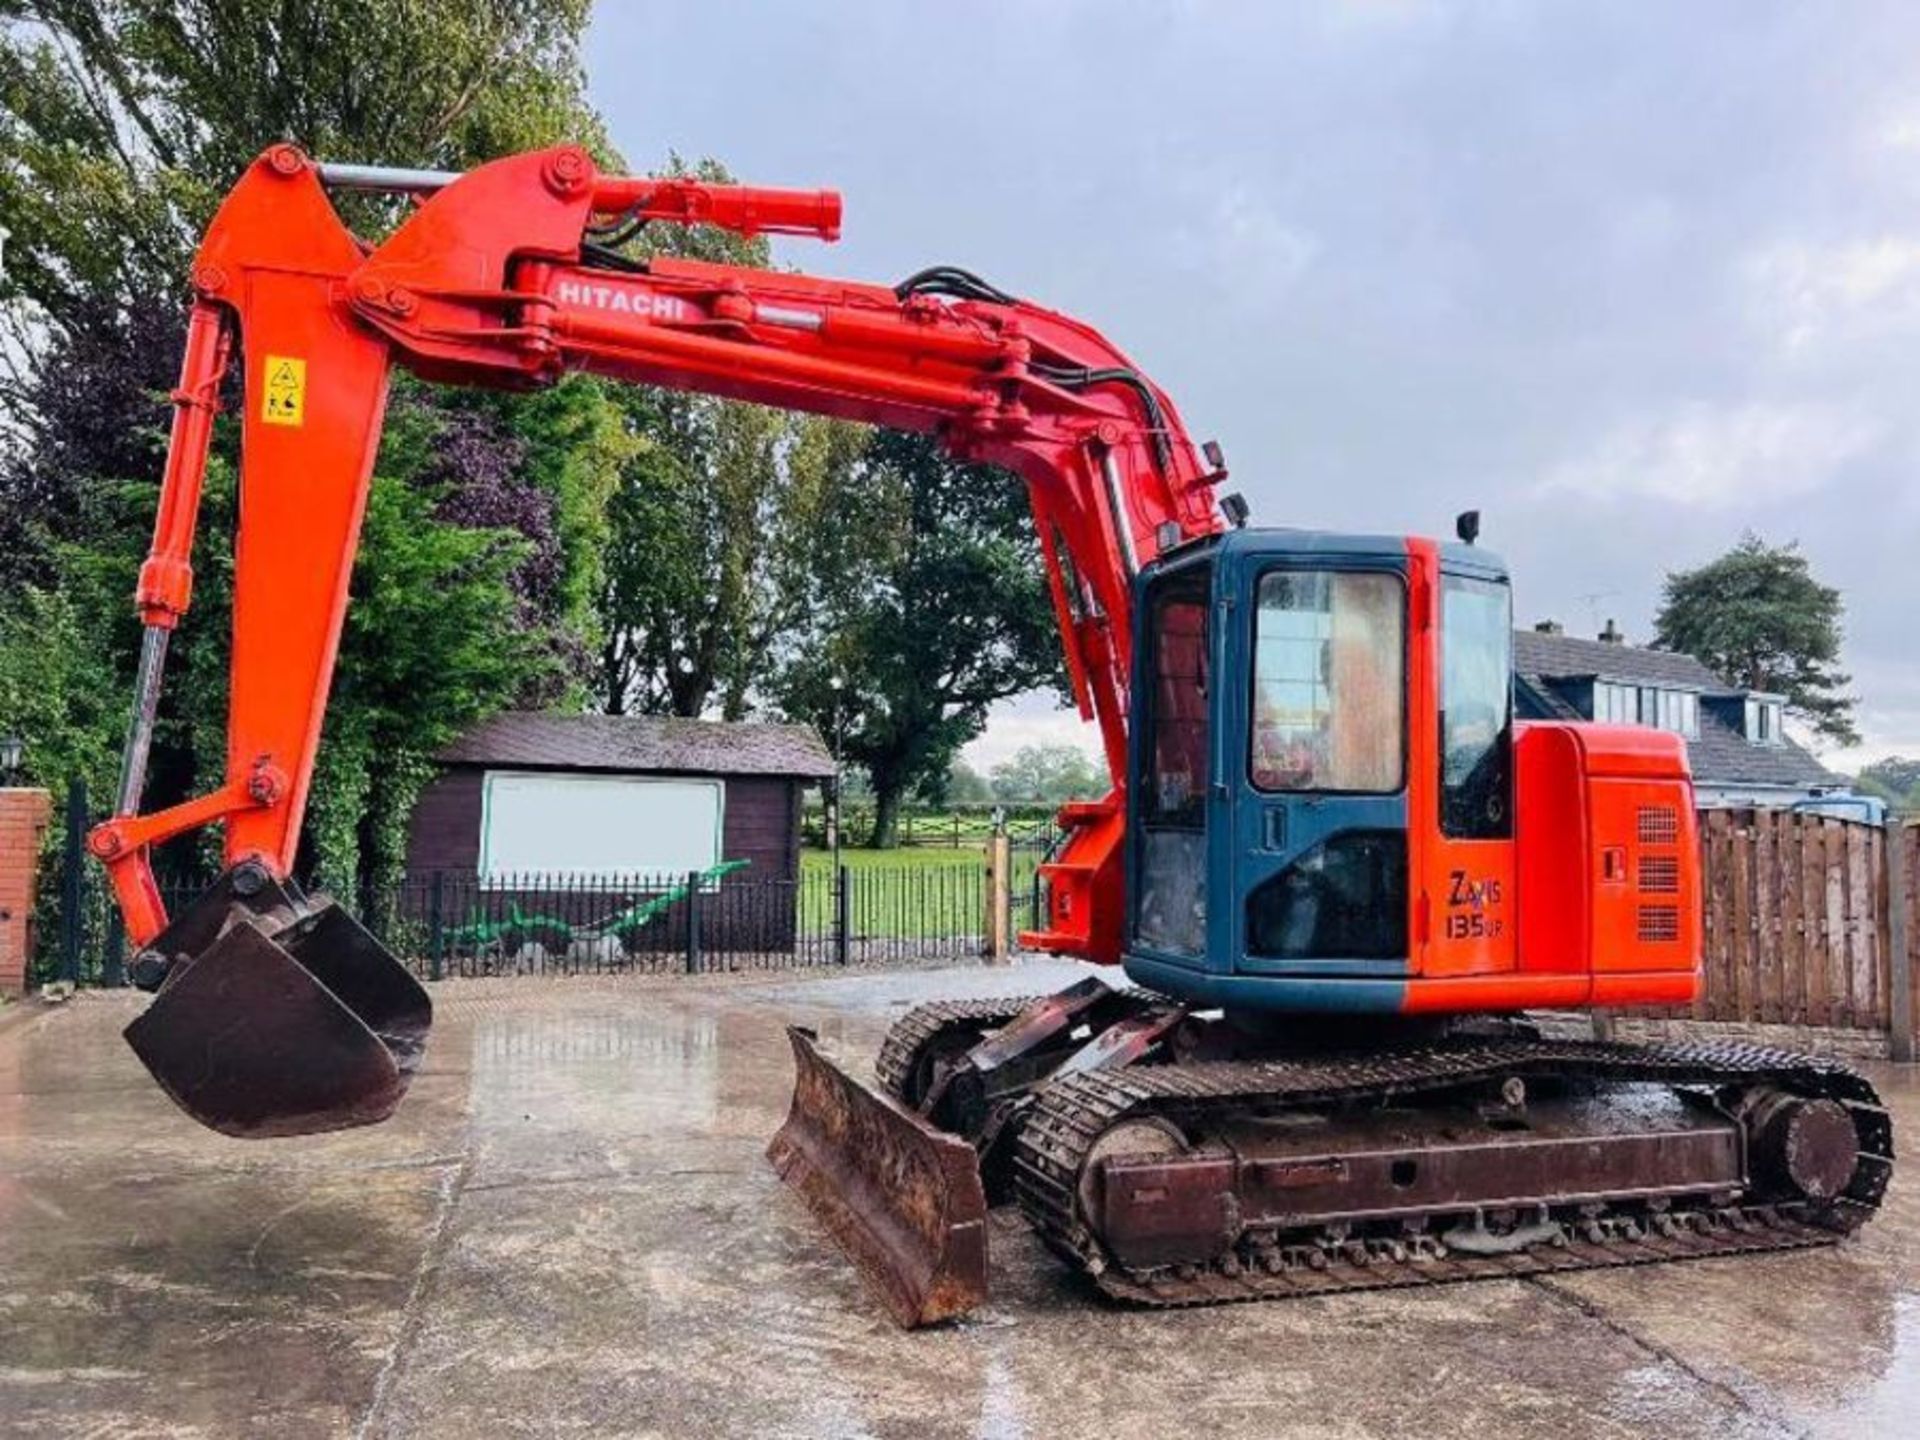 HITACHI ZAXIS 135UR TRACKED EXCAVATOR C/W FRONT BLADE - Image 17 of 17